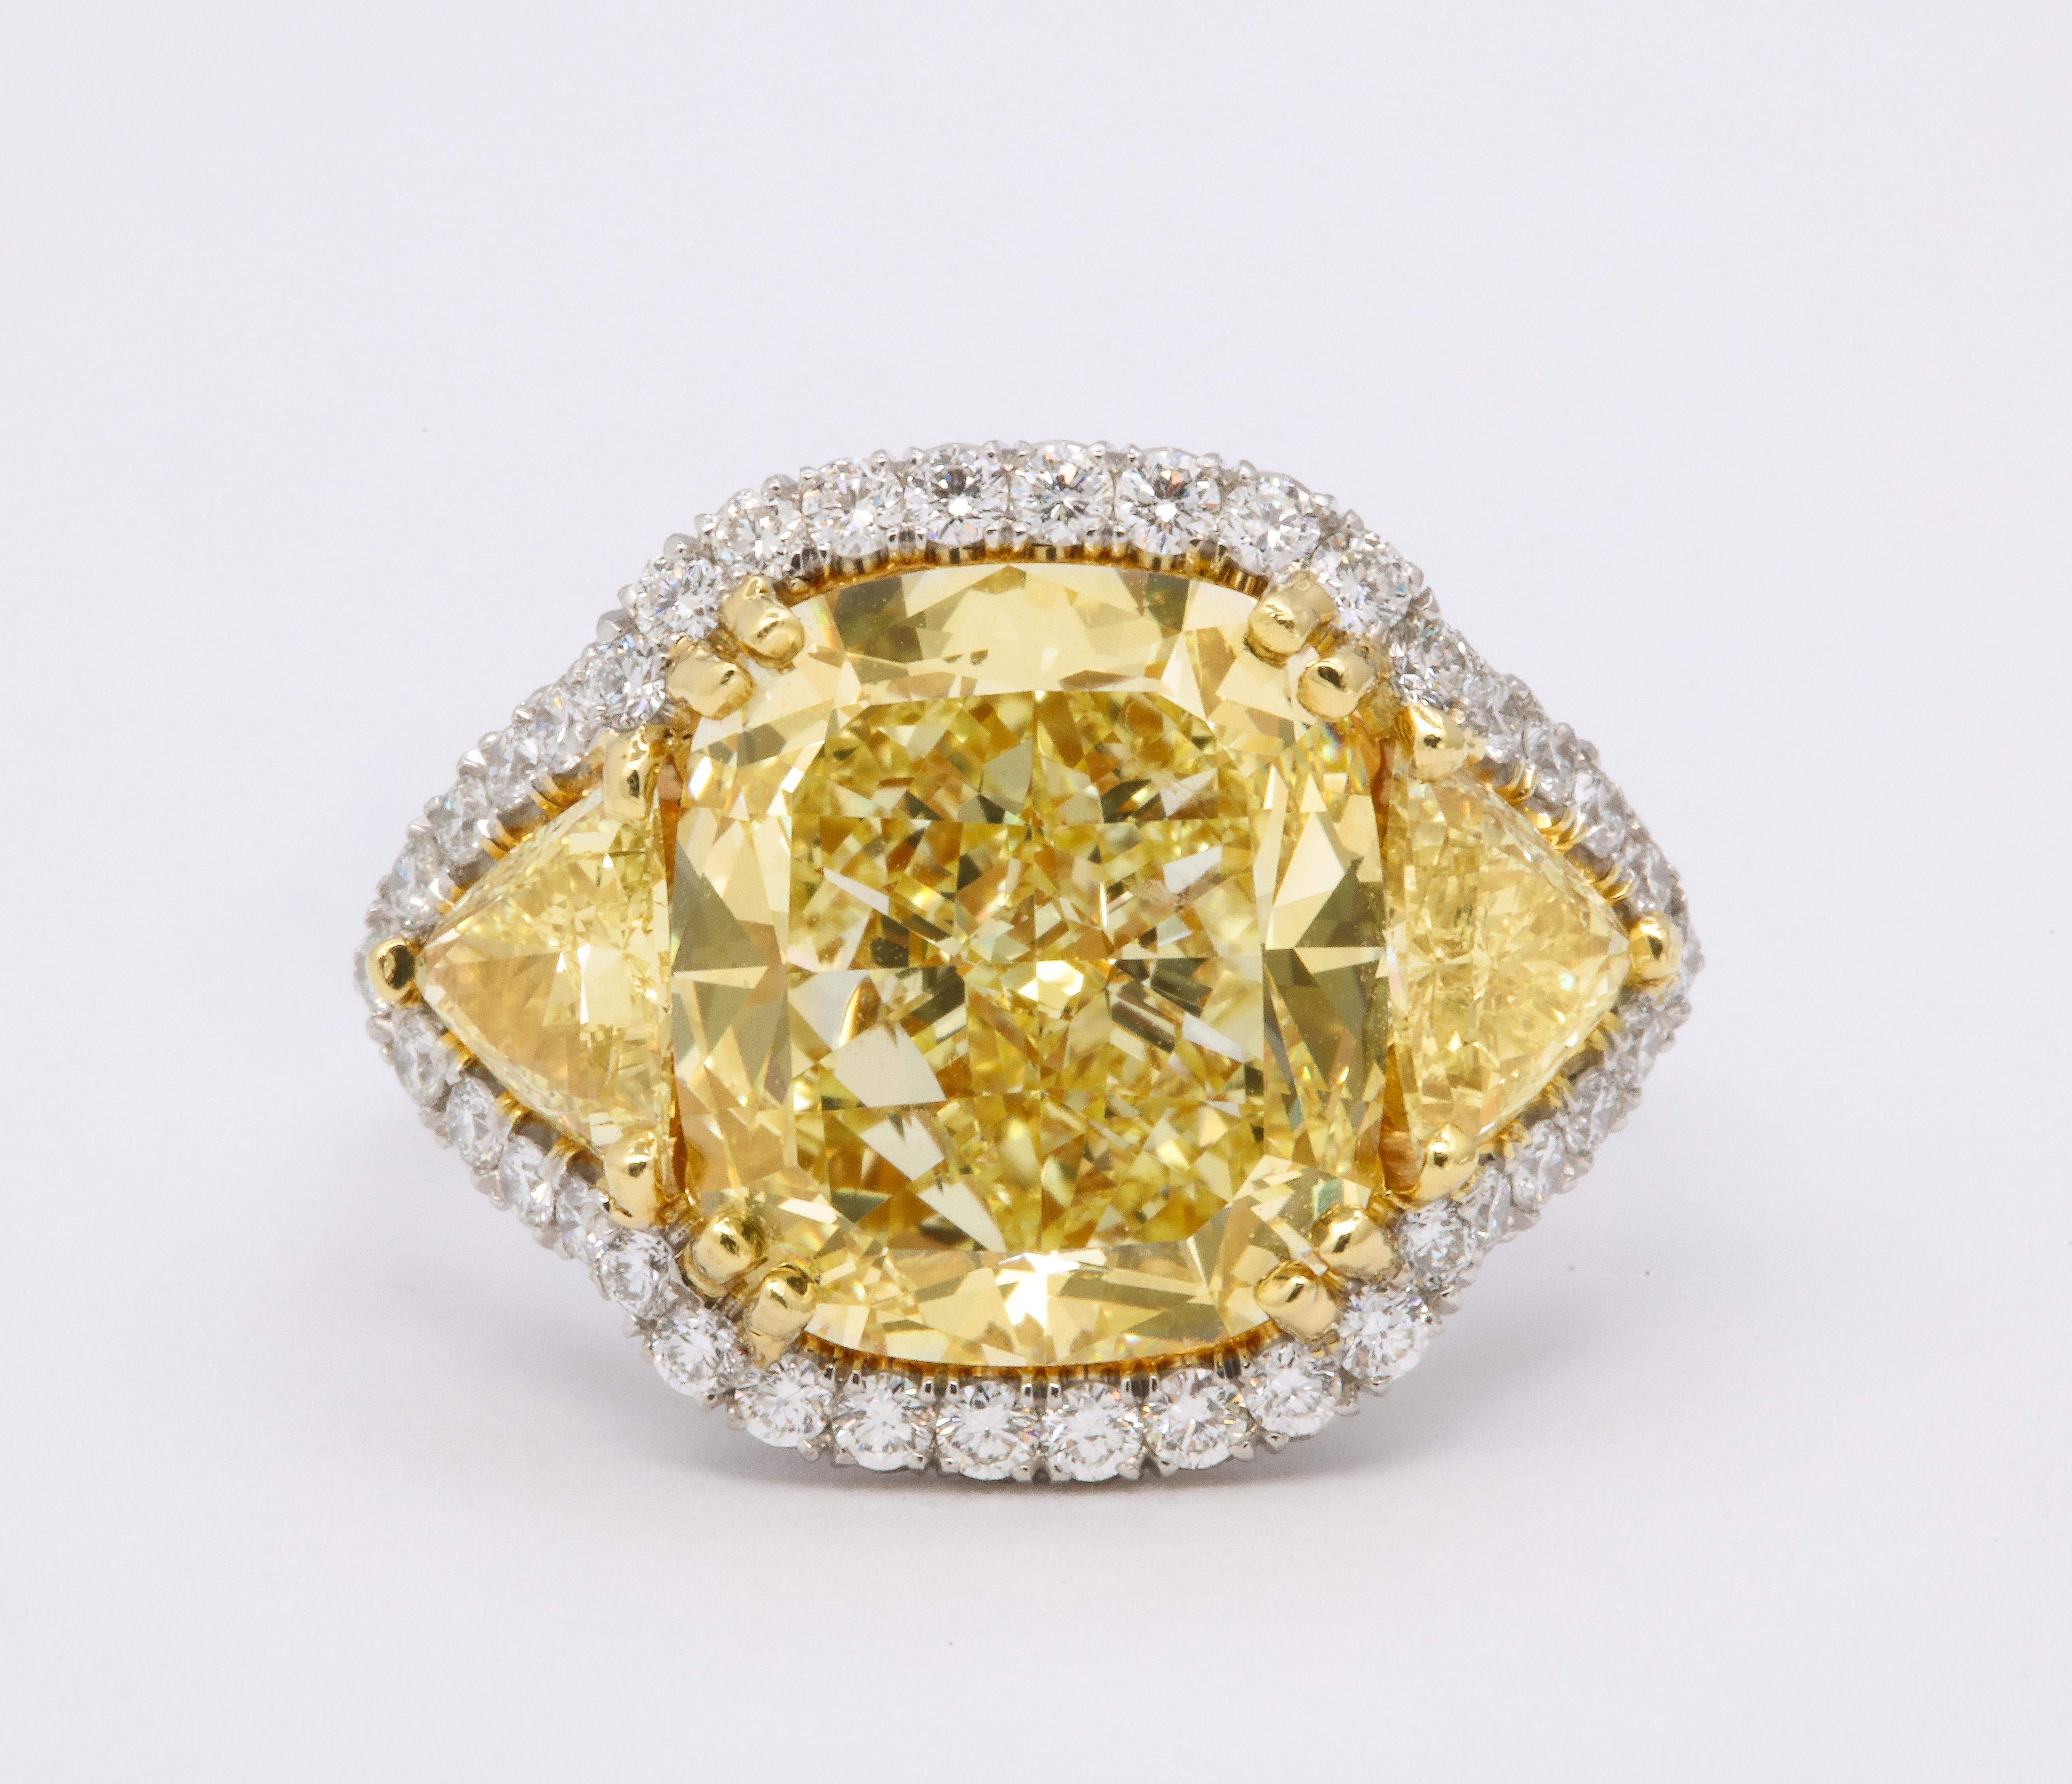 
An incredible yellow diamond set in a unique custom mounting. 

This diamond has a rich yellow color and is full of life.

GIA certified 8.33 carat Fancy Yellow VS1 cushion cut diamond. 

Approximately 1.50 carats in matching yellow diamond